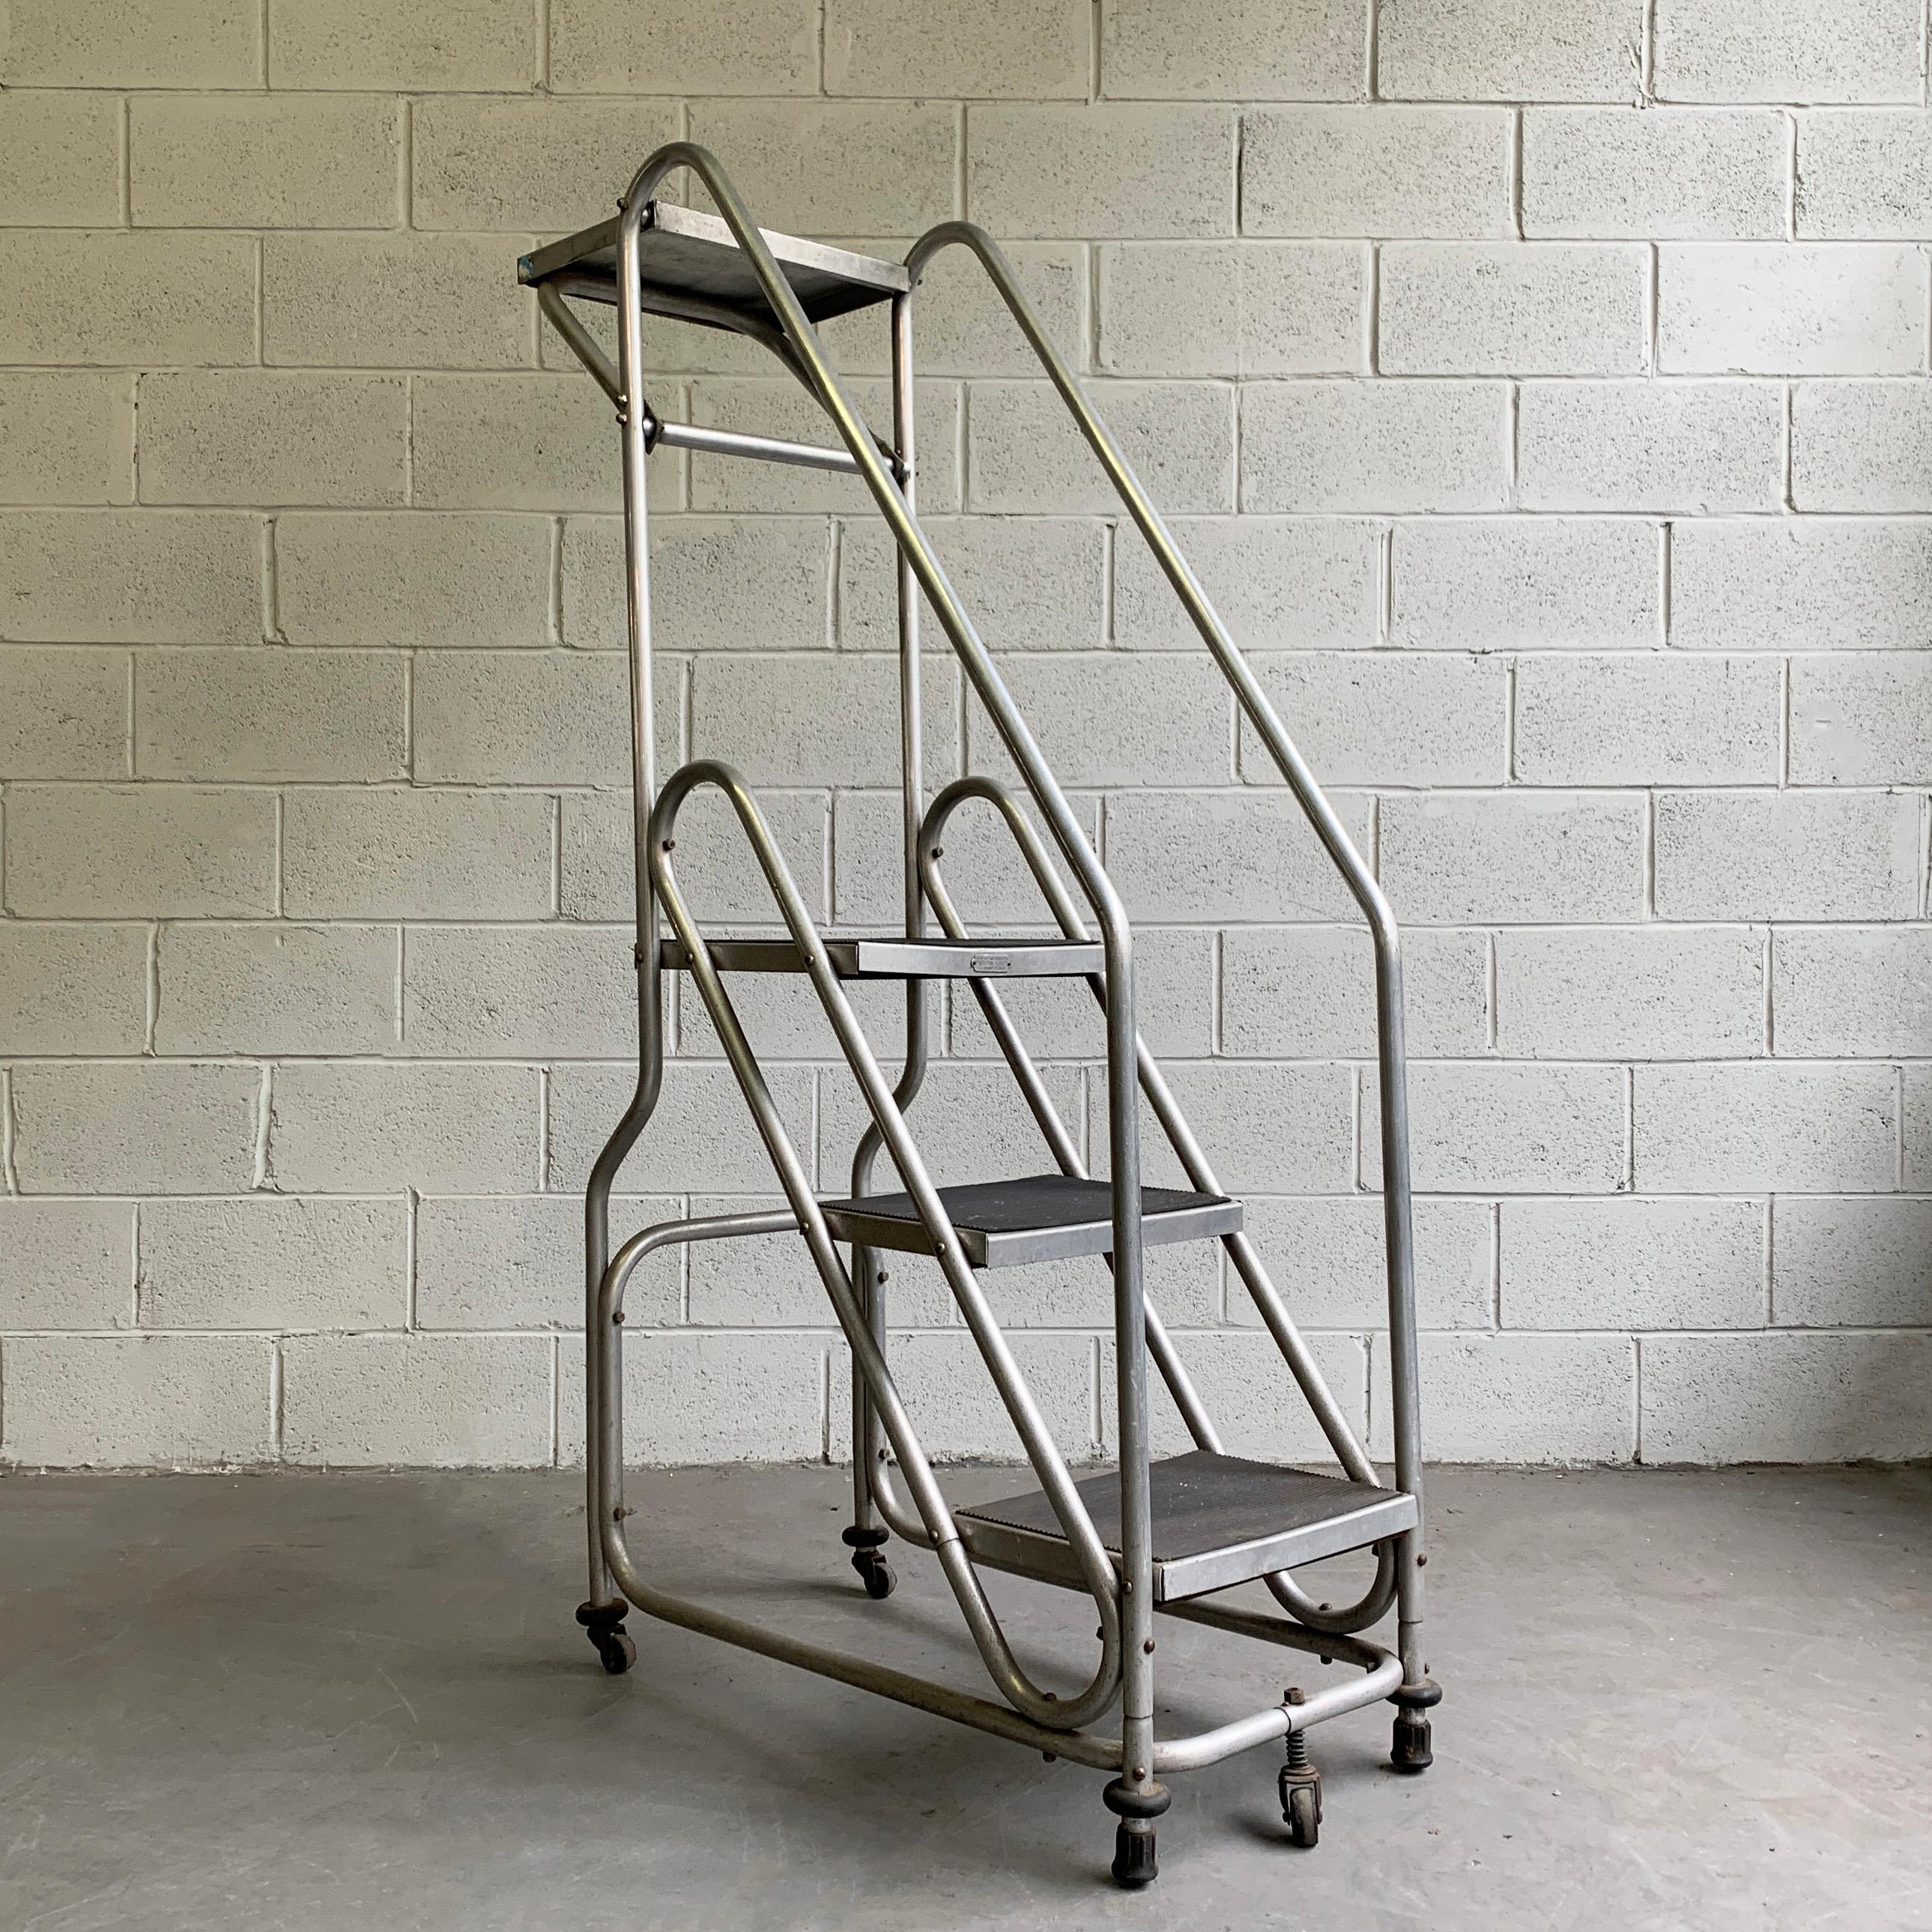 Group sale of 8 industrial pieces consisting of:
(1) Aluminum rolling ladder
(1) Industrial table top shelf
(1) Tall steel mesh hospital stool
(1) Short steel mesh hospital stool
(1) KEM Weber adjustable dentist stool - green base
(1) Early 20th